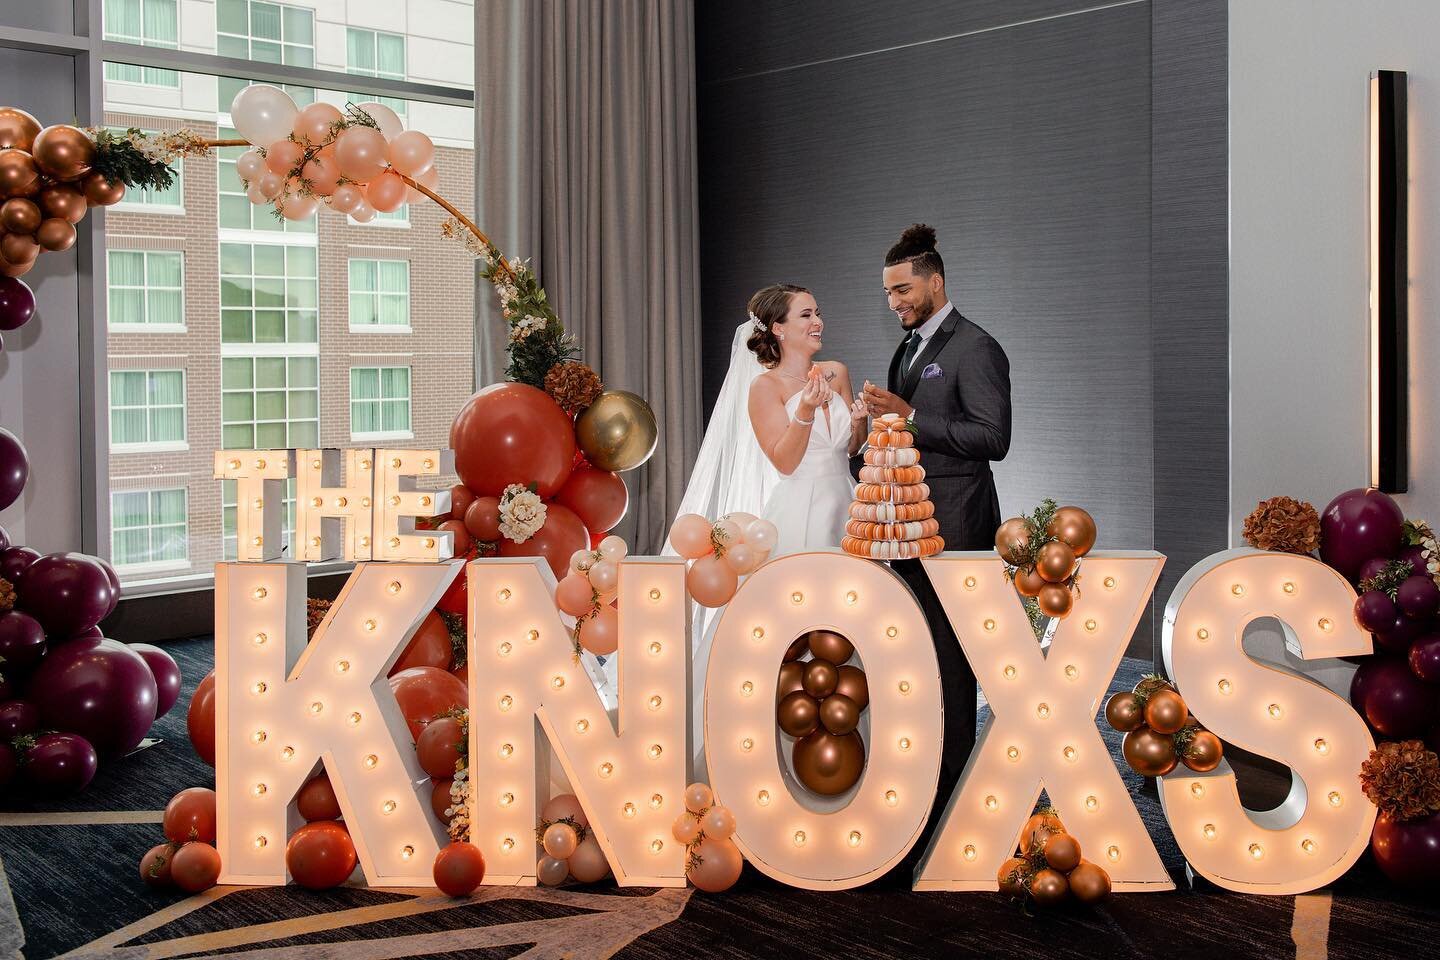 Weddings will forever have our hearts🤍✨✨✨
.
This incredible vendor team created something out of a fairytale 😍 Hosted by @kansascityengaged at the beautiful @loewskc, there wasn&rsquo;t a detail missed by @trinityeventskc and the rest of the amazin